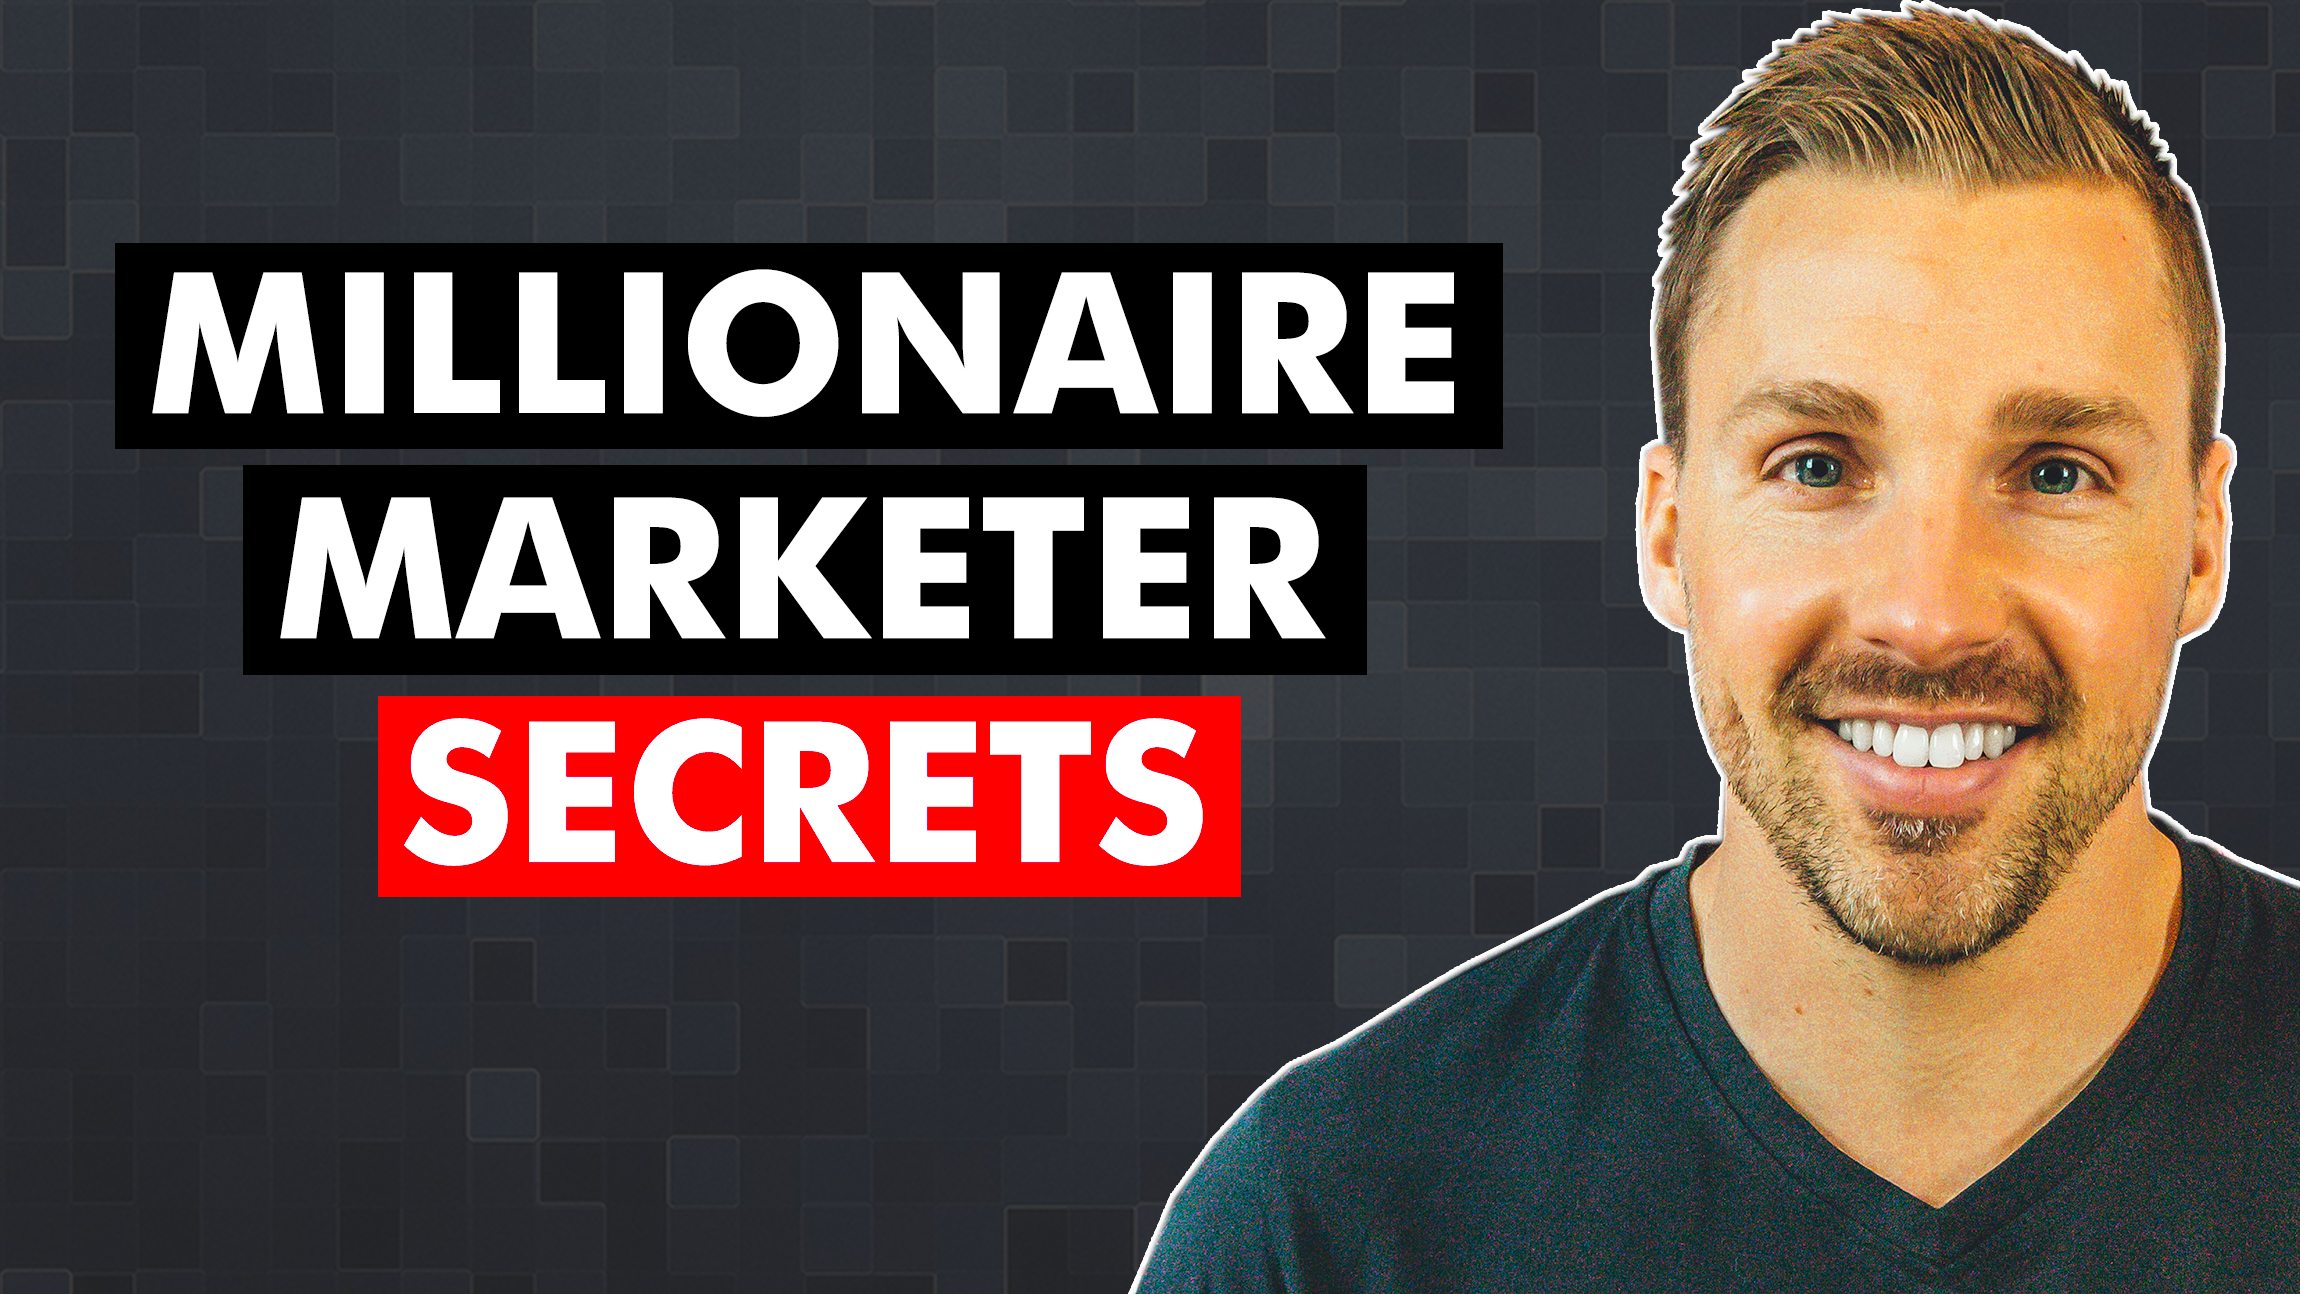 7 Habits Of Self Made Millionaires | What The Best Marketers Have In Common